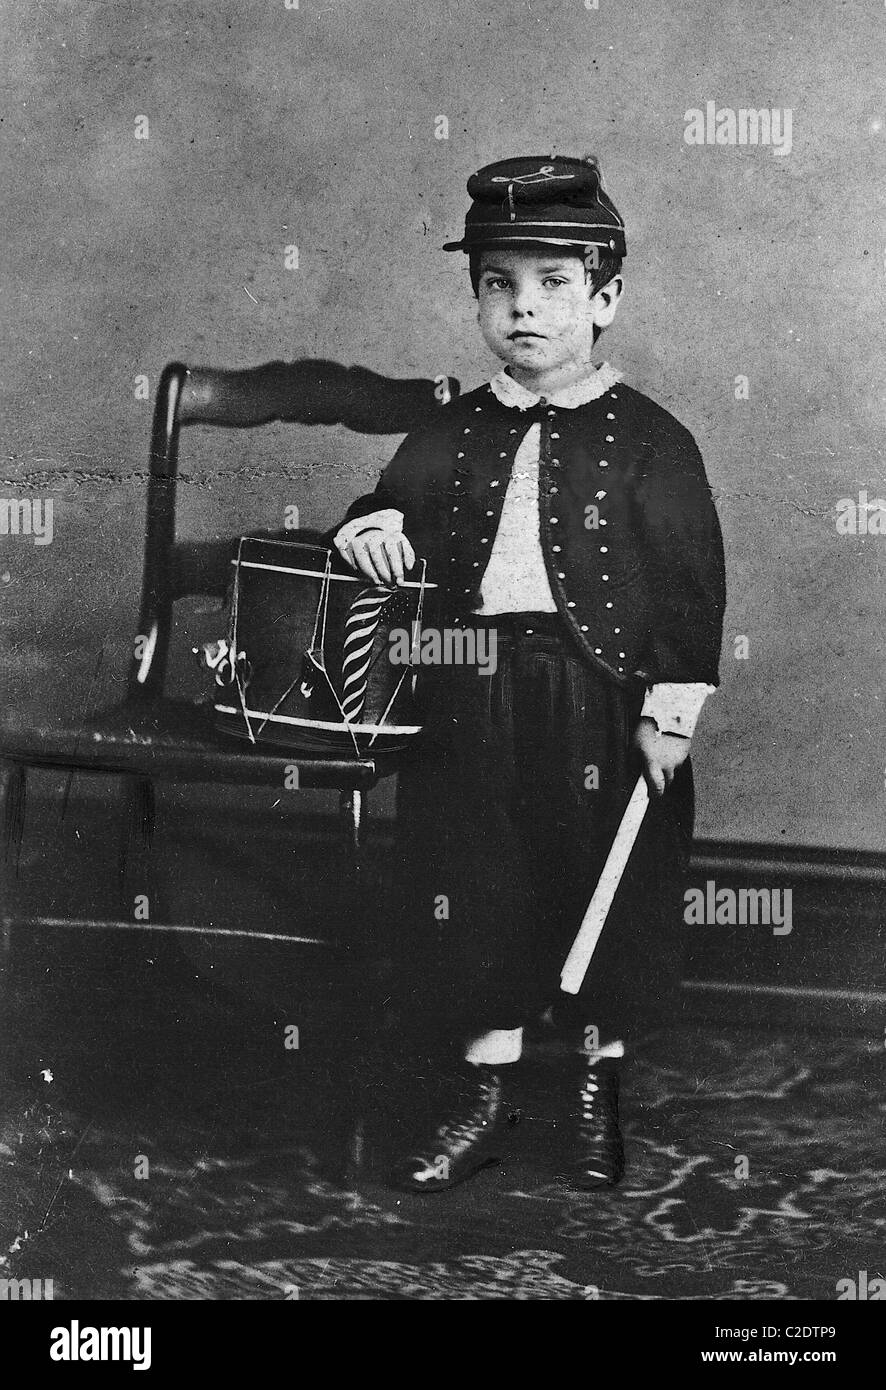 Boy in uniform of the Union Army Stock Photo